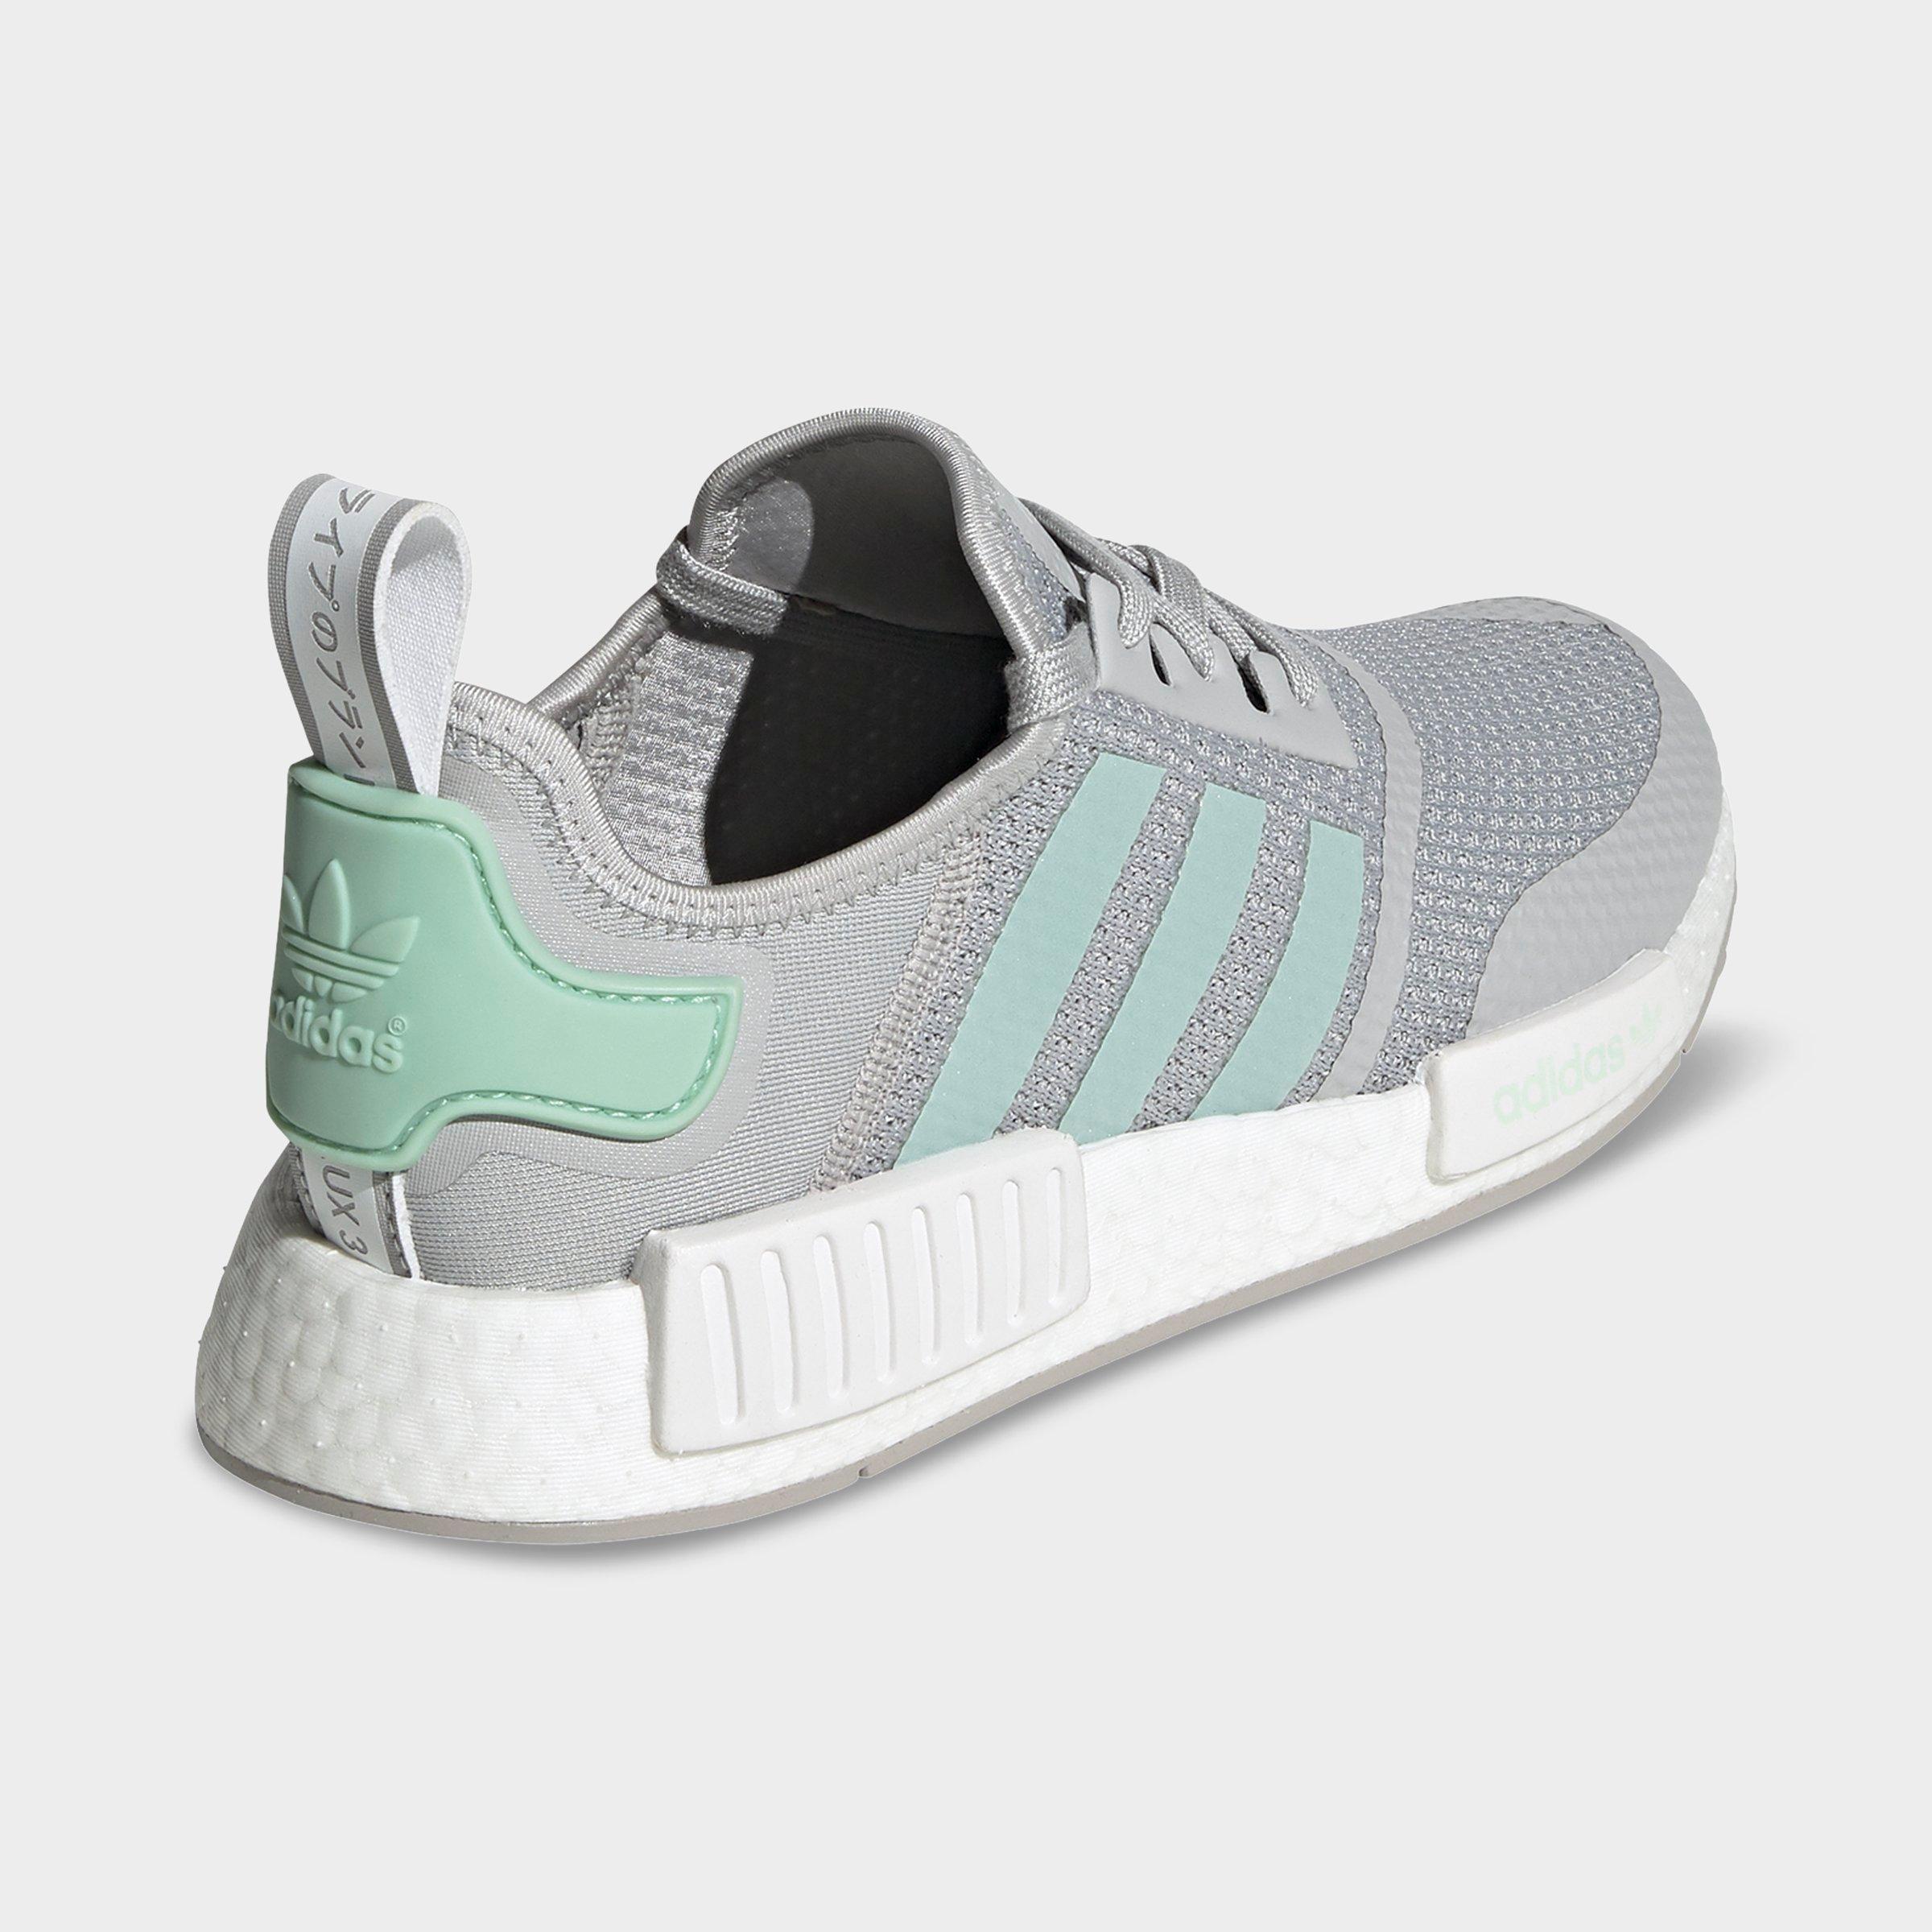 nmd grey shoes